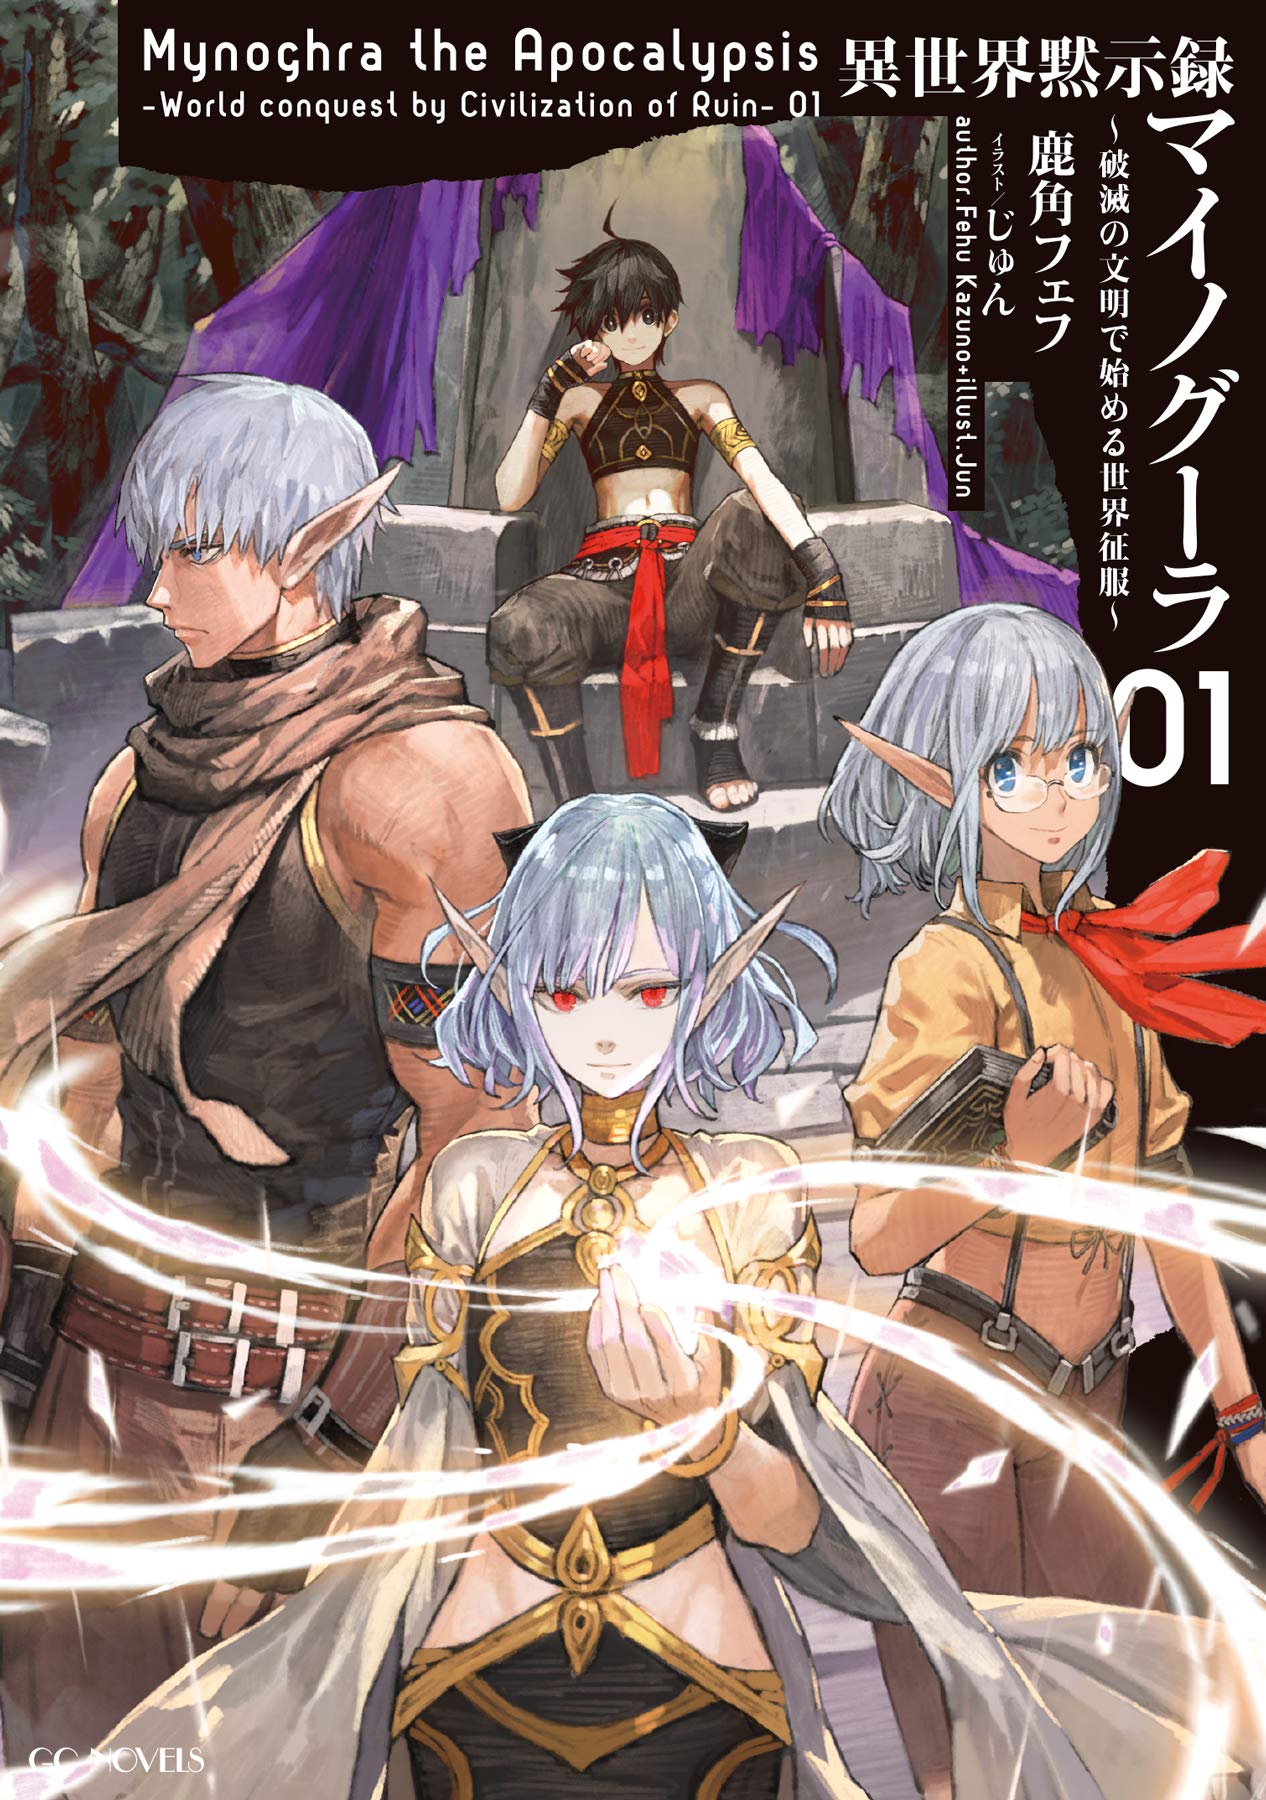 isekai-apocalypse-mynoghra-the-conquest-of-the-world-starts-with-the-civilization-of-ruin